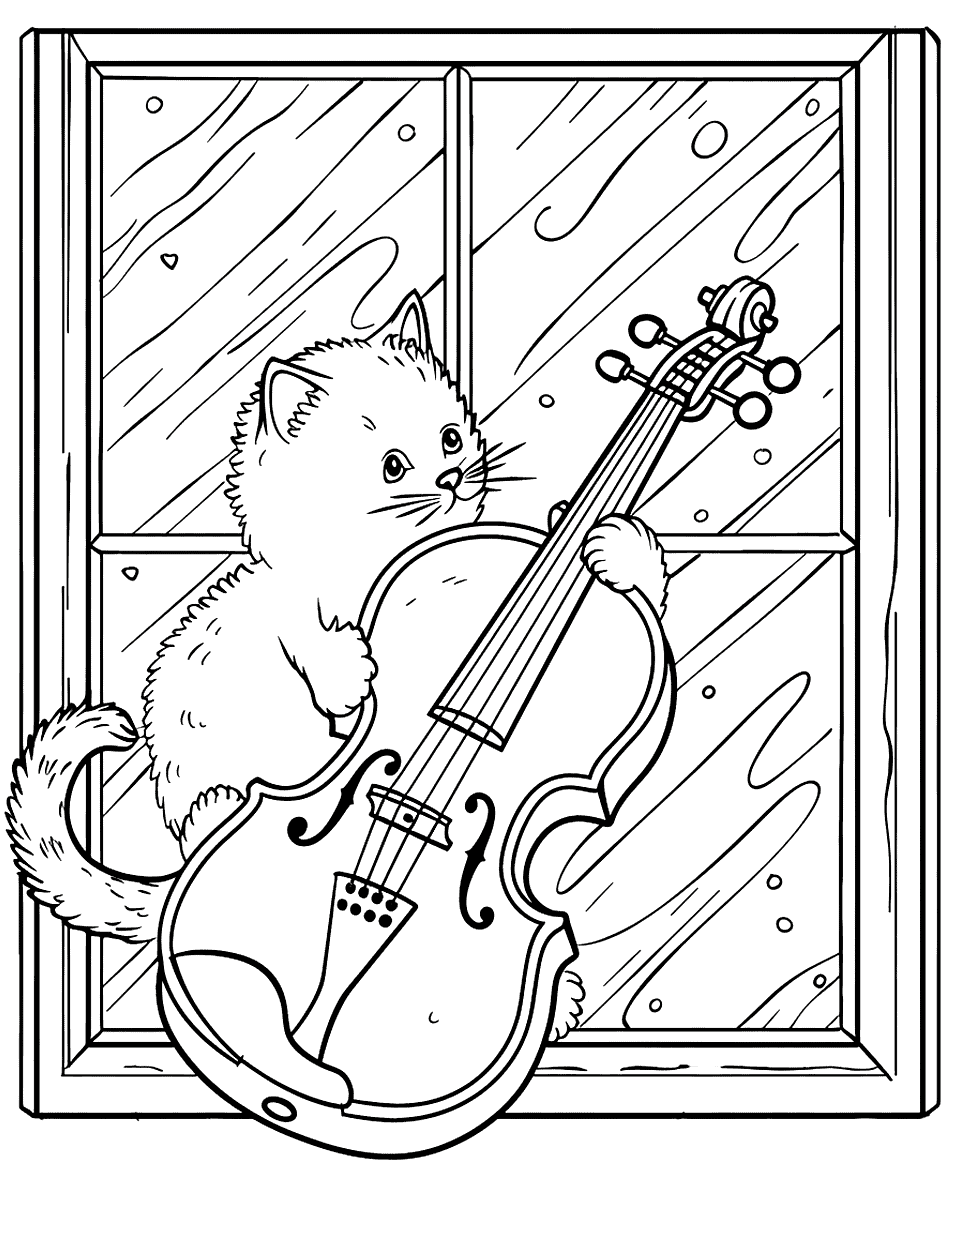 Cute Violin Practice Music Coloring Page - A kitten trying to play a violin, sitting beside a window.